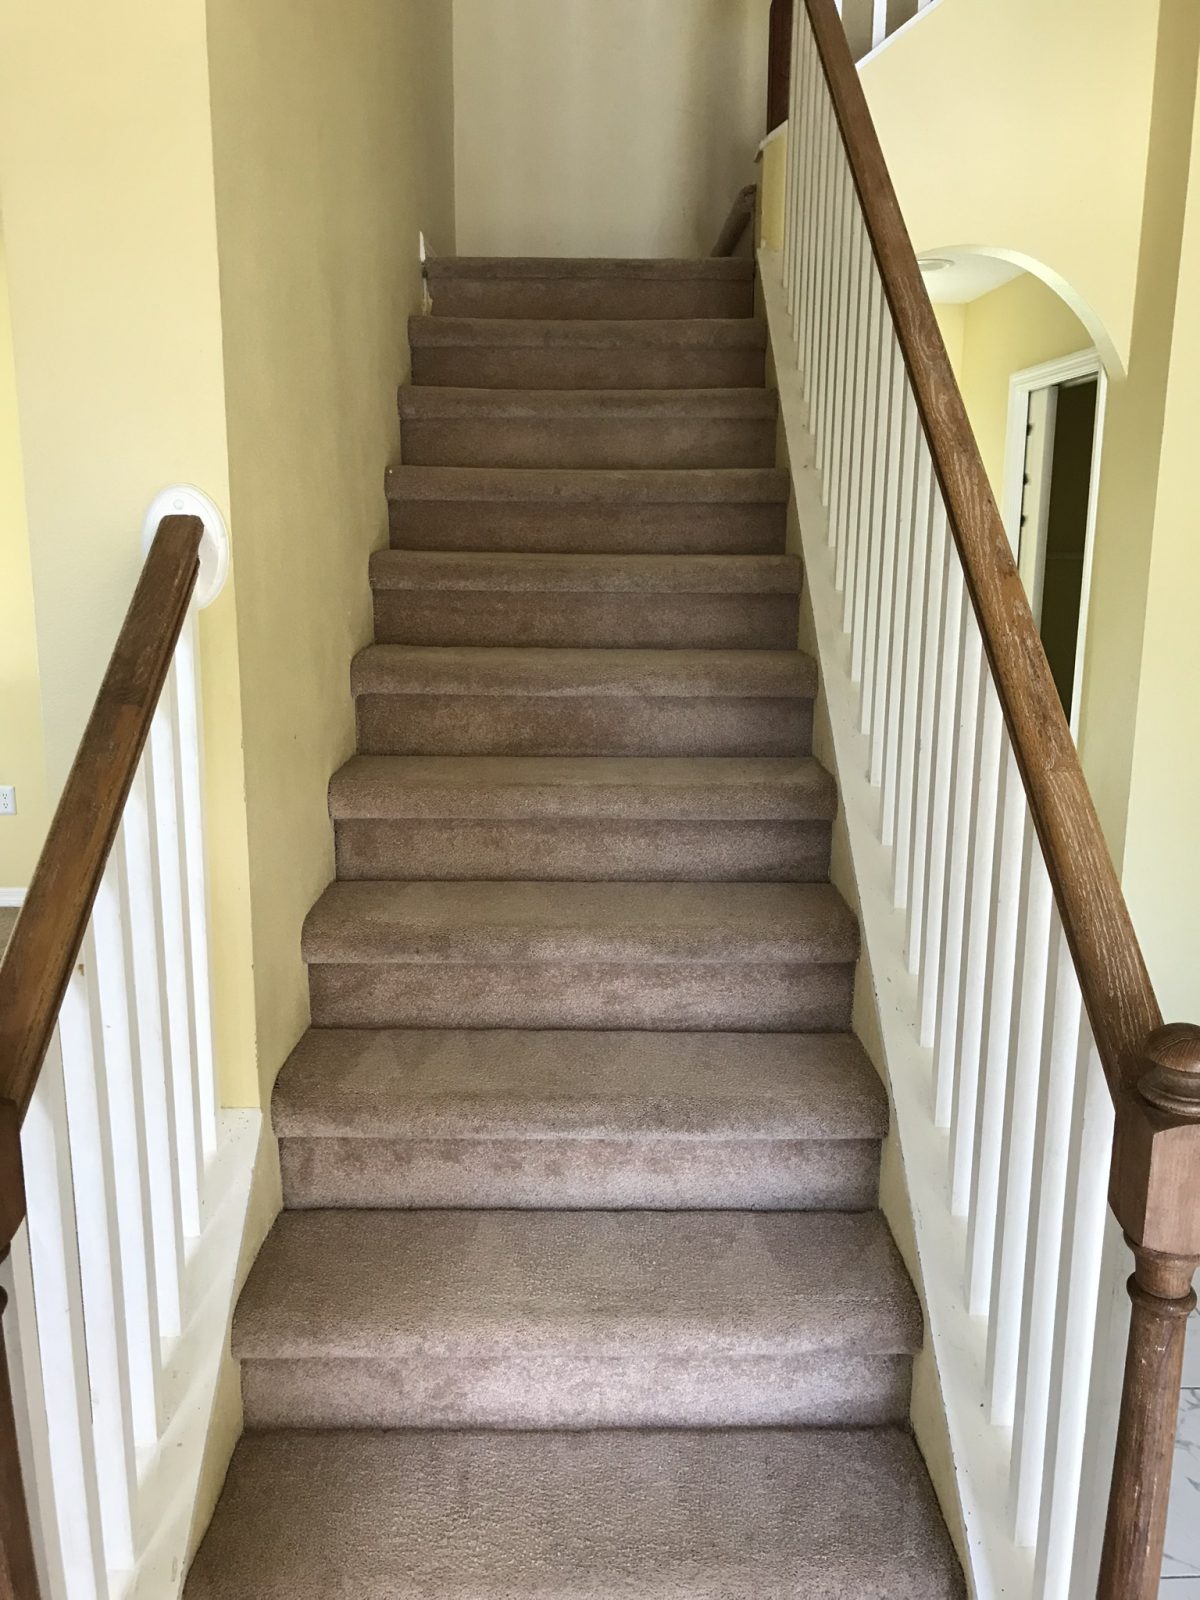 Professional Carpet Cleaning Odessa Florida by Howards Cleaning Service